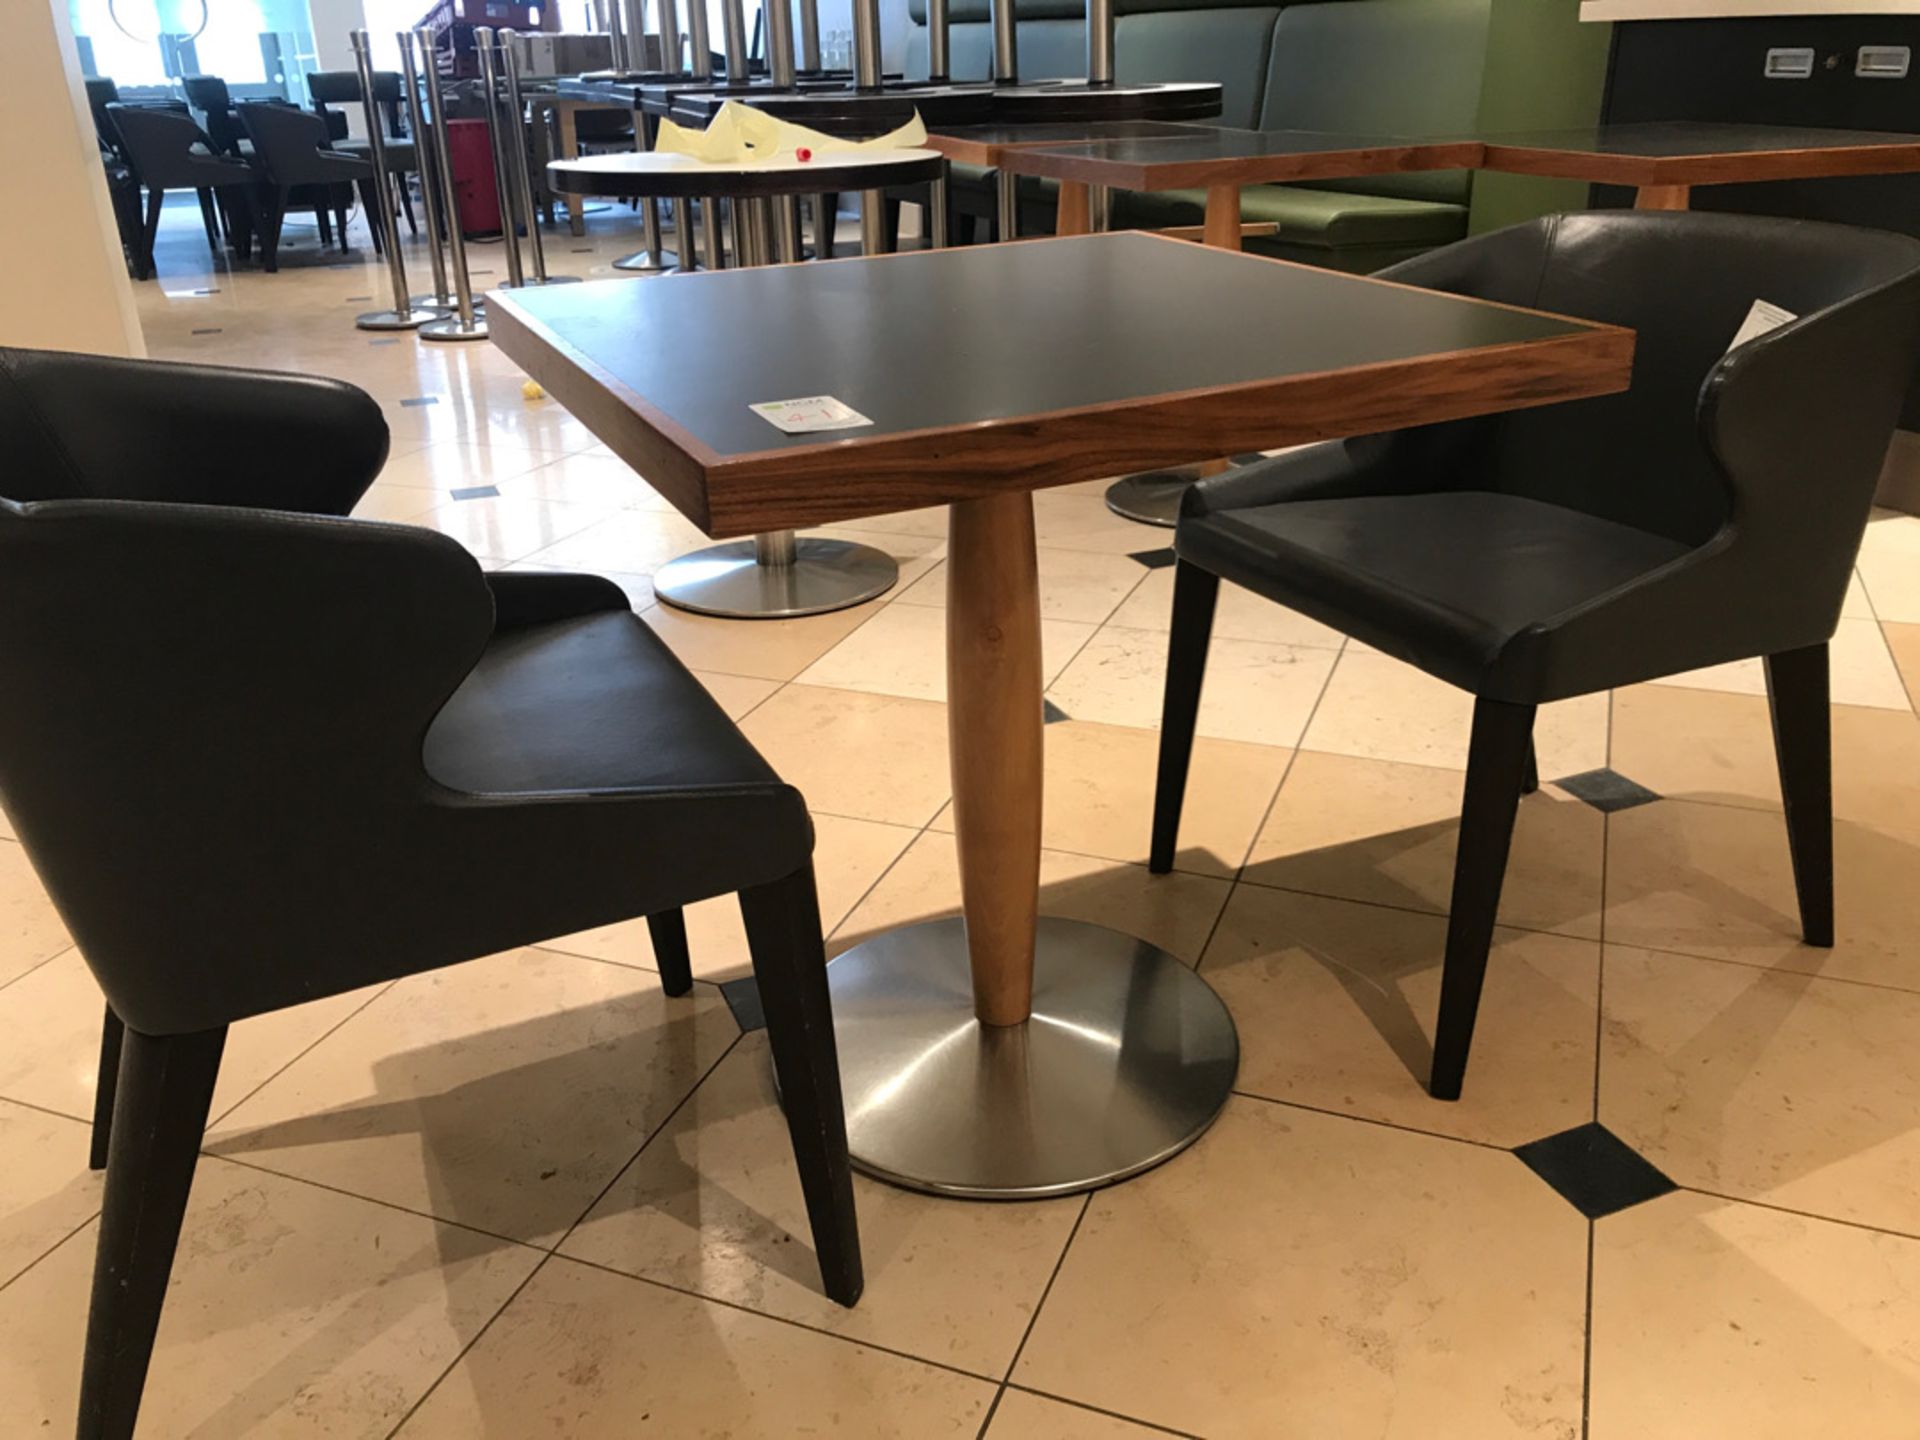 Modern square pedestal table with two chairs - Image 2 of 4